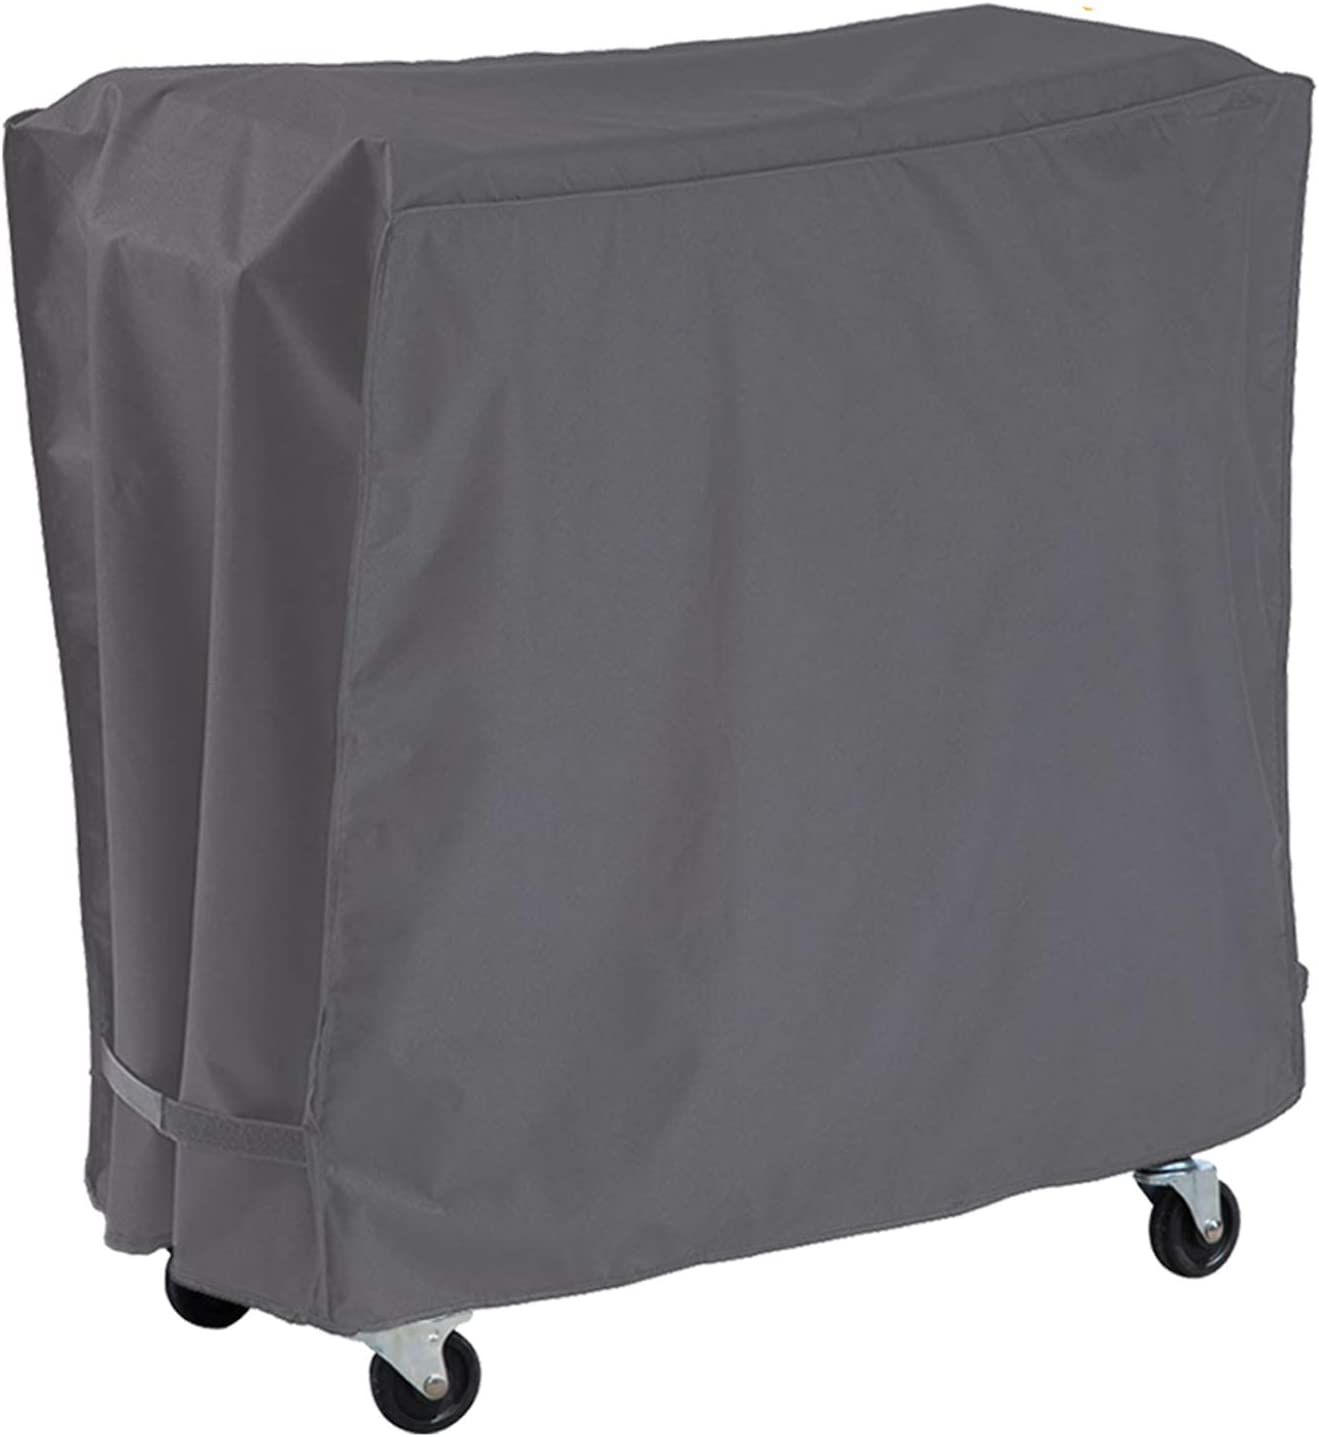 Cooler Cart Cover Waterproof Oxford Fabric Patio Ice Chest Protective Covers